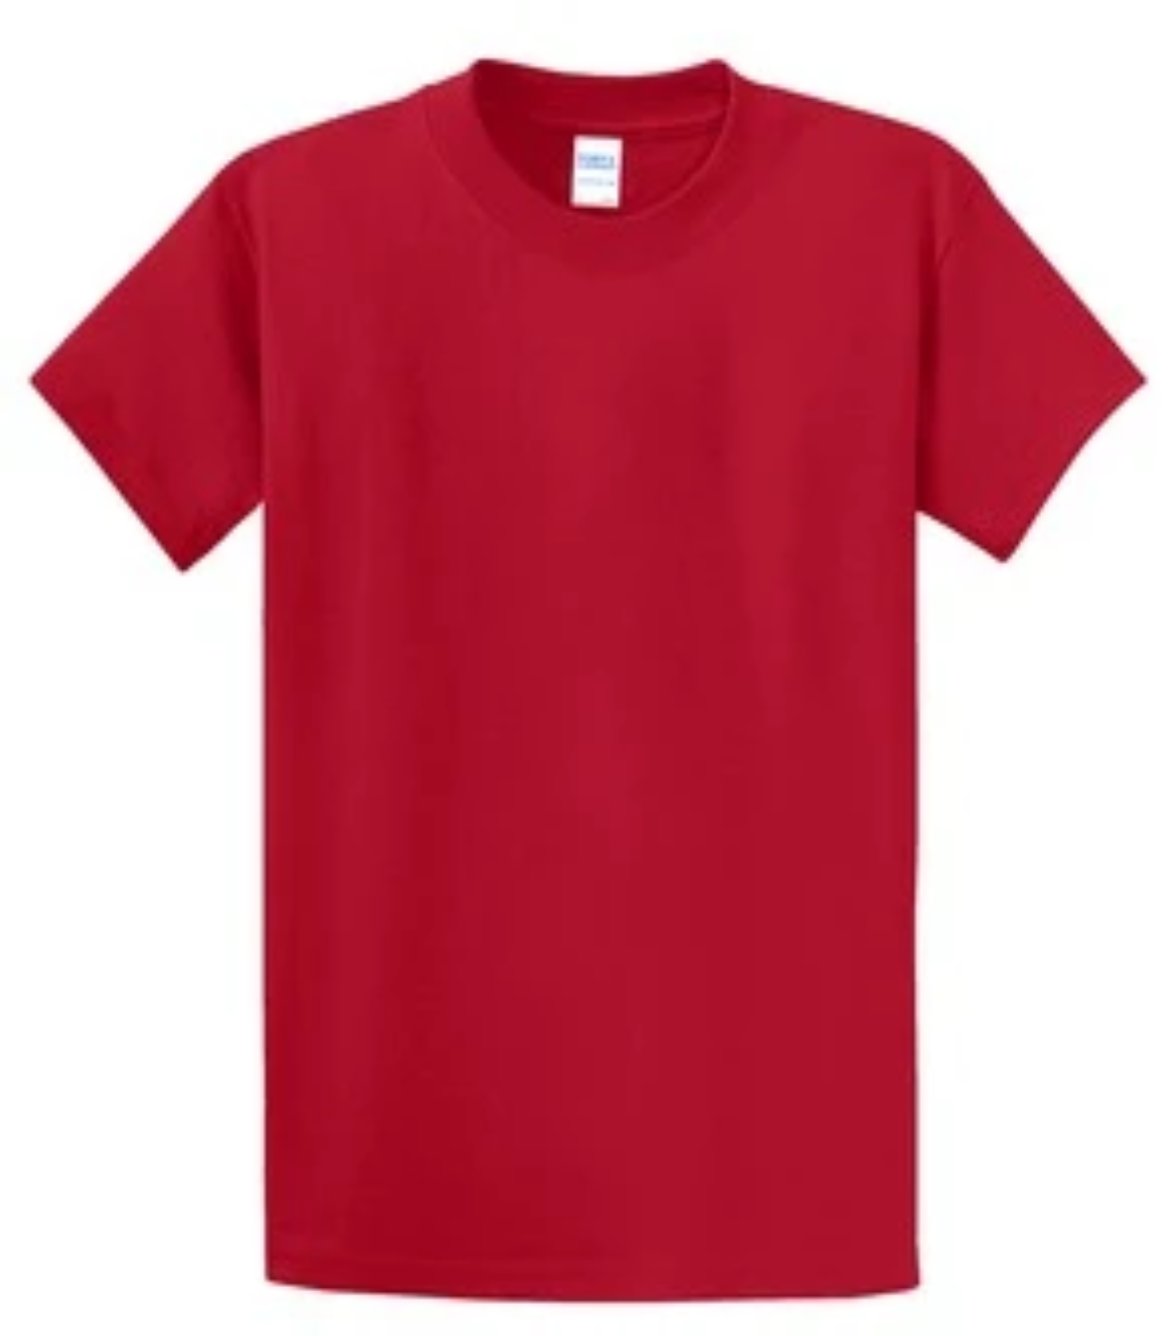 Port & Company 100% Cotton Essential T-Shirt Red Tall PC61T